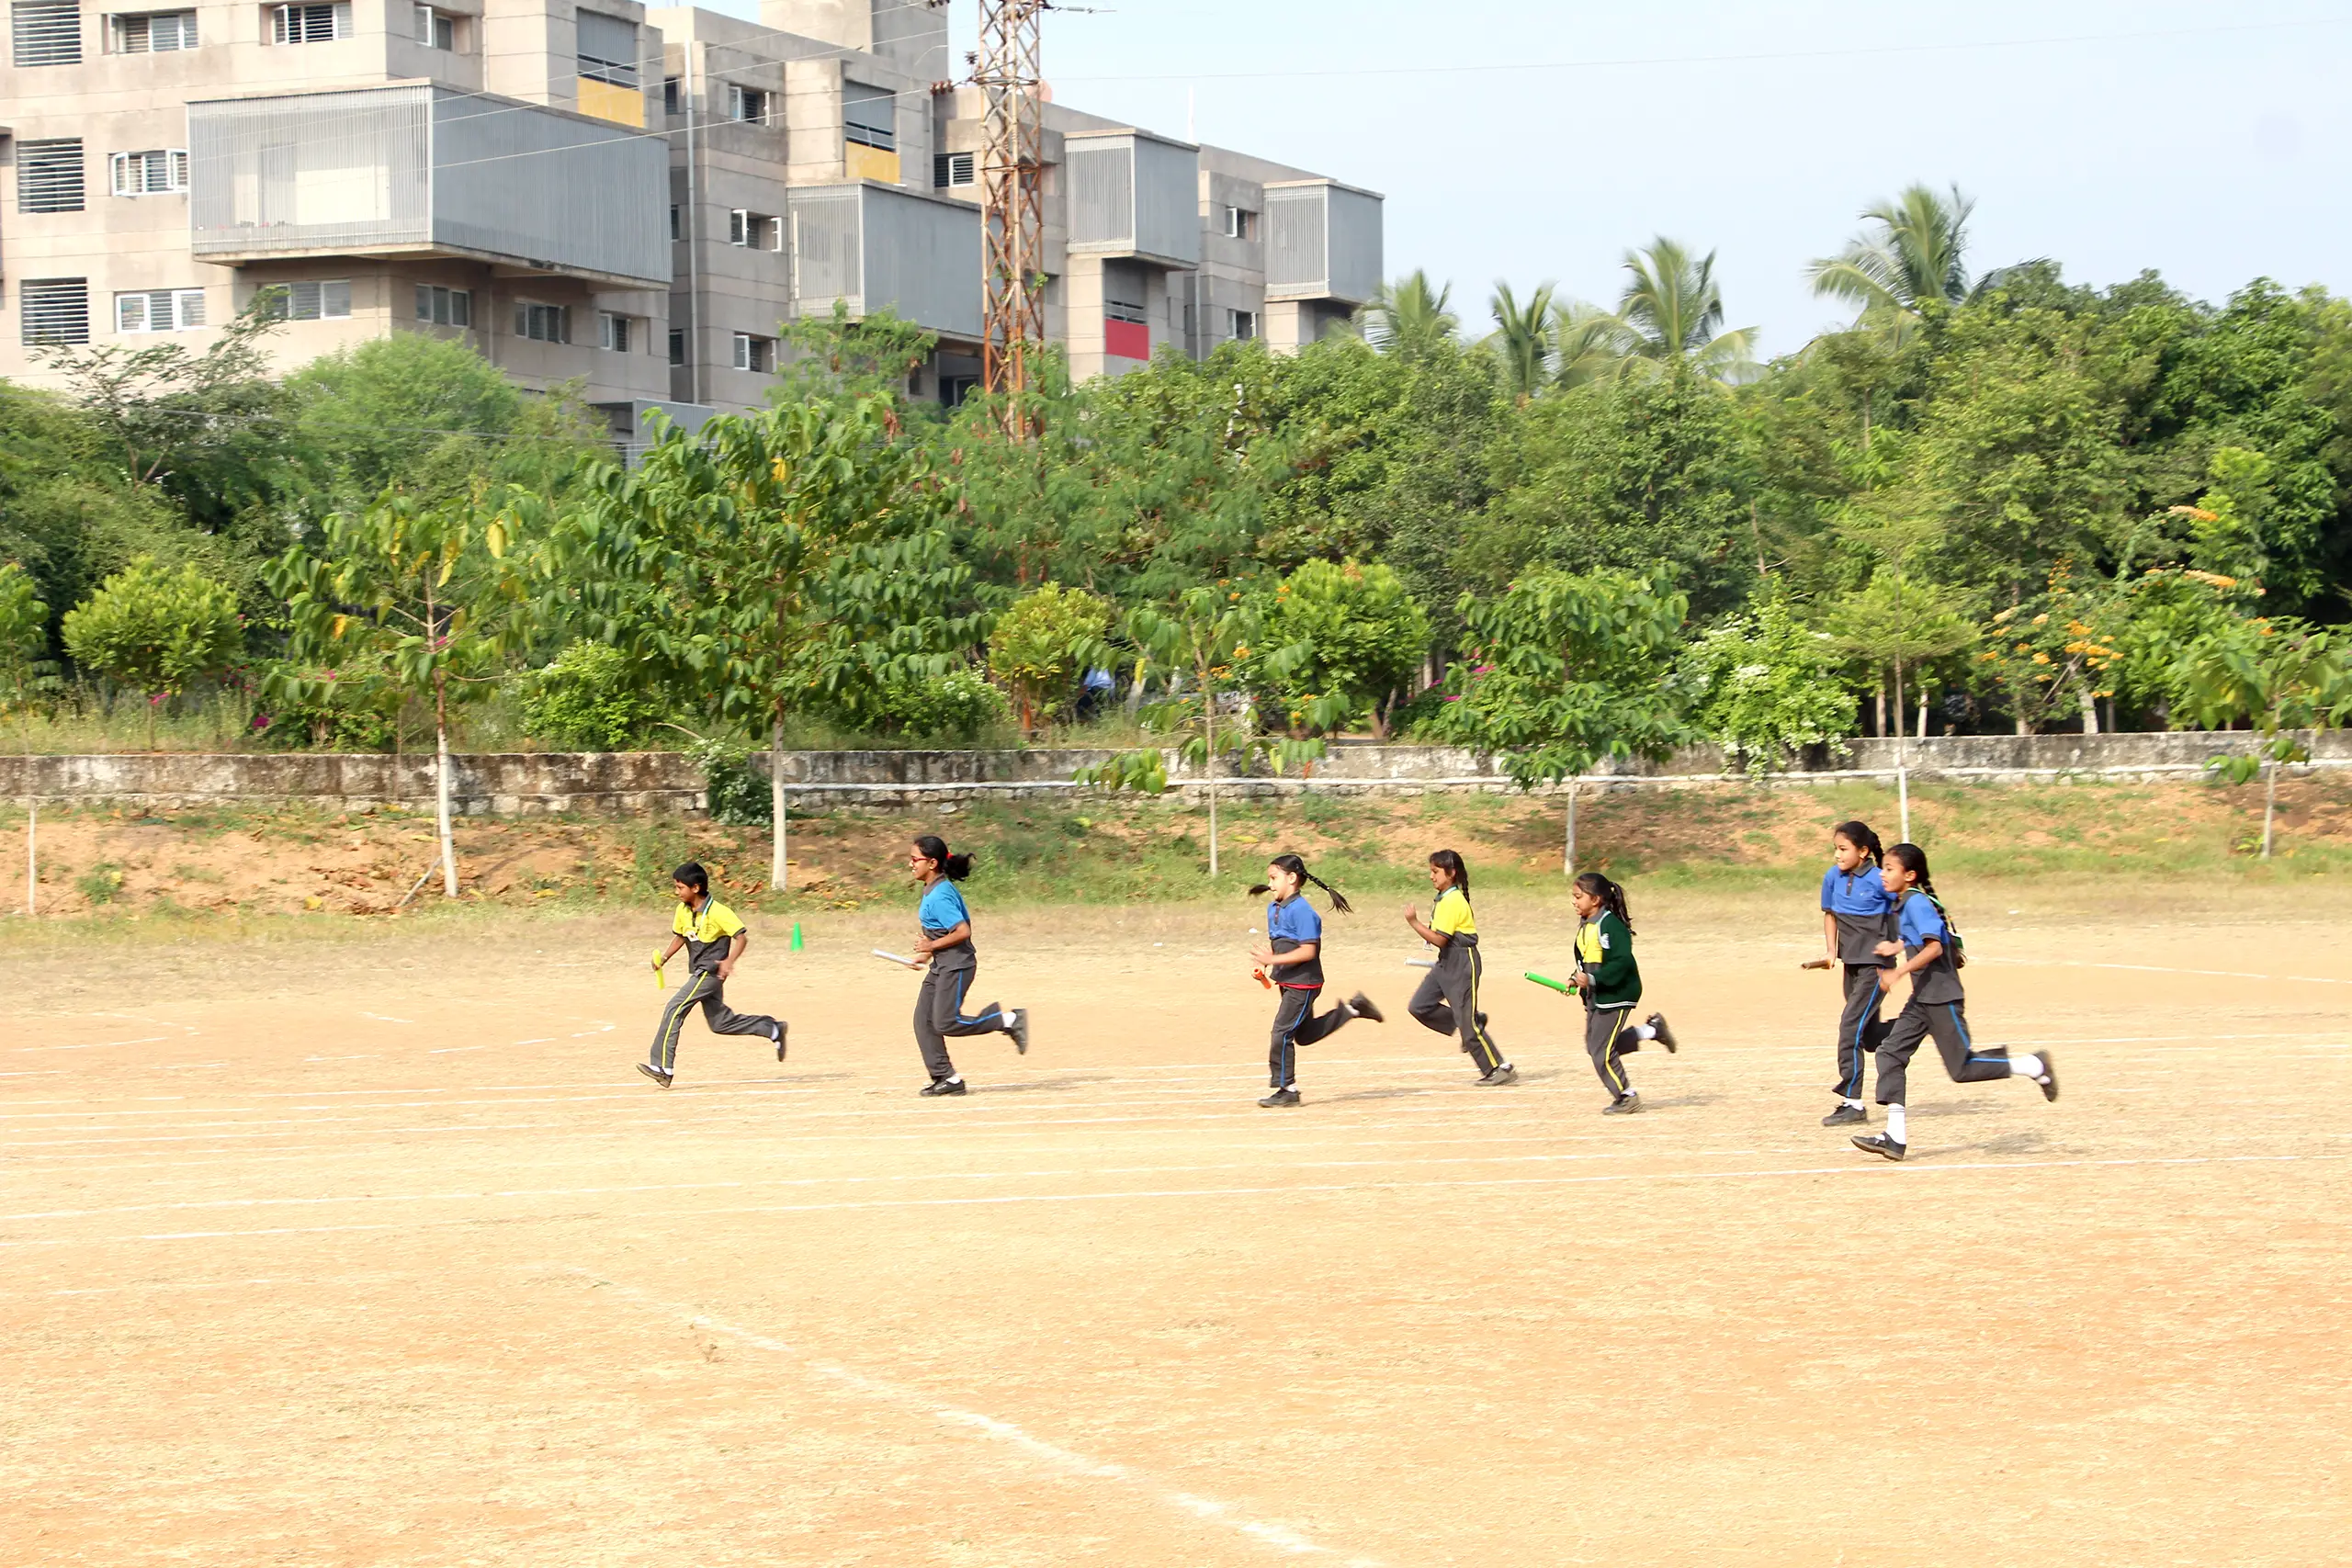 Children at DPS Warangal school playing in the ground with trees around.